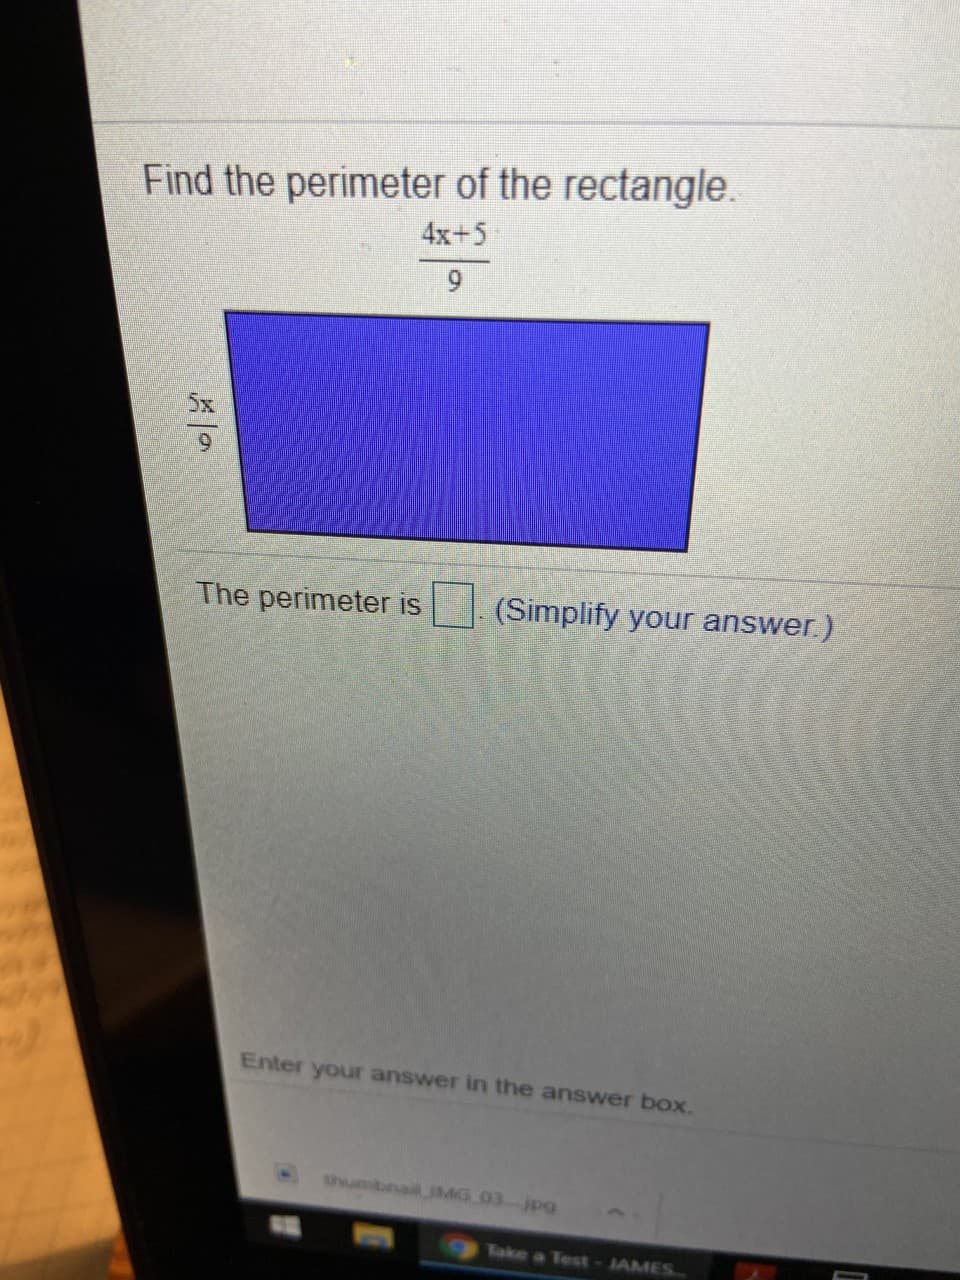 Find the perimeter of the rectangle.
4x+5
The perimeter is
(Simplify your answer.)
Enter your answer in the answer box.
shumbnail MG 03.jpg
Take a Test-JAMES...
